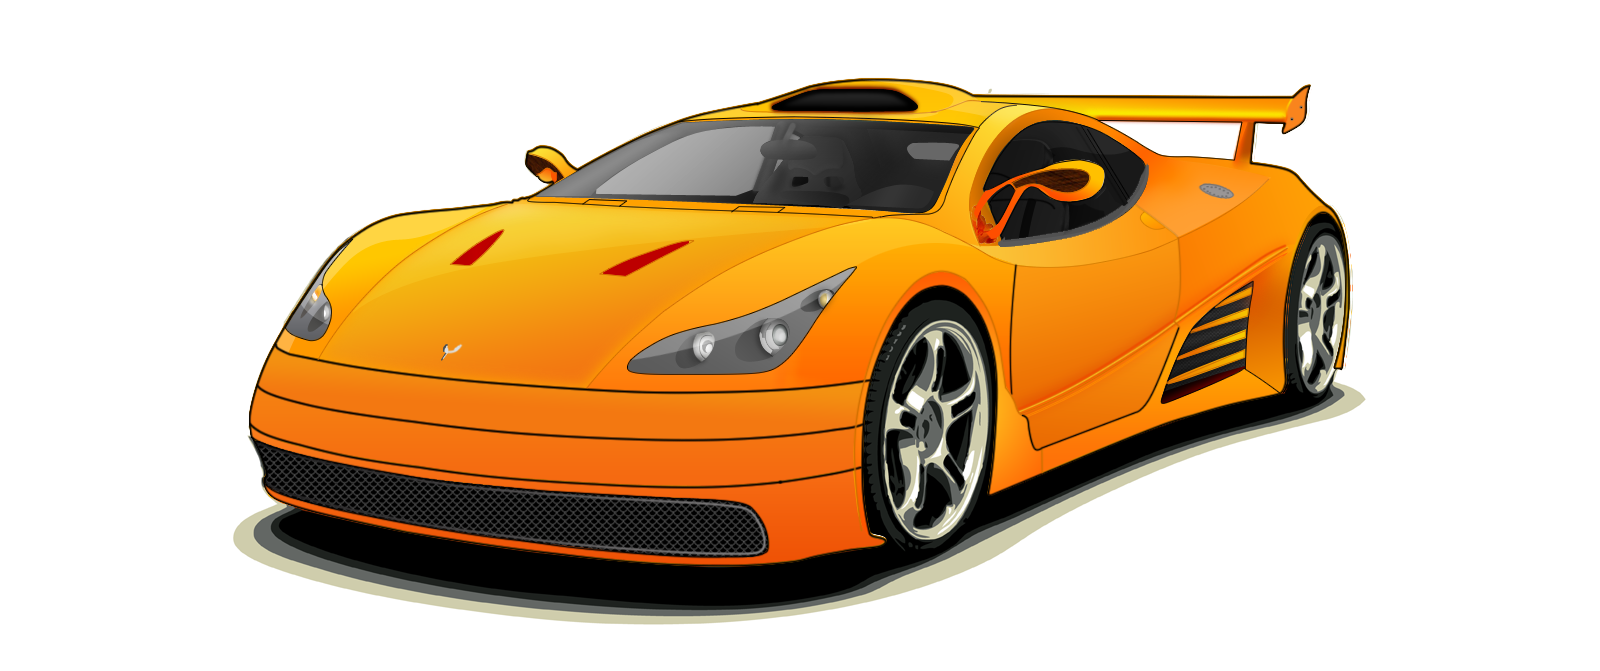 Concept Car Vector by DruXite on Clipart library